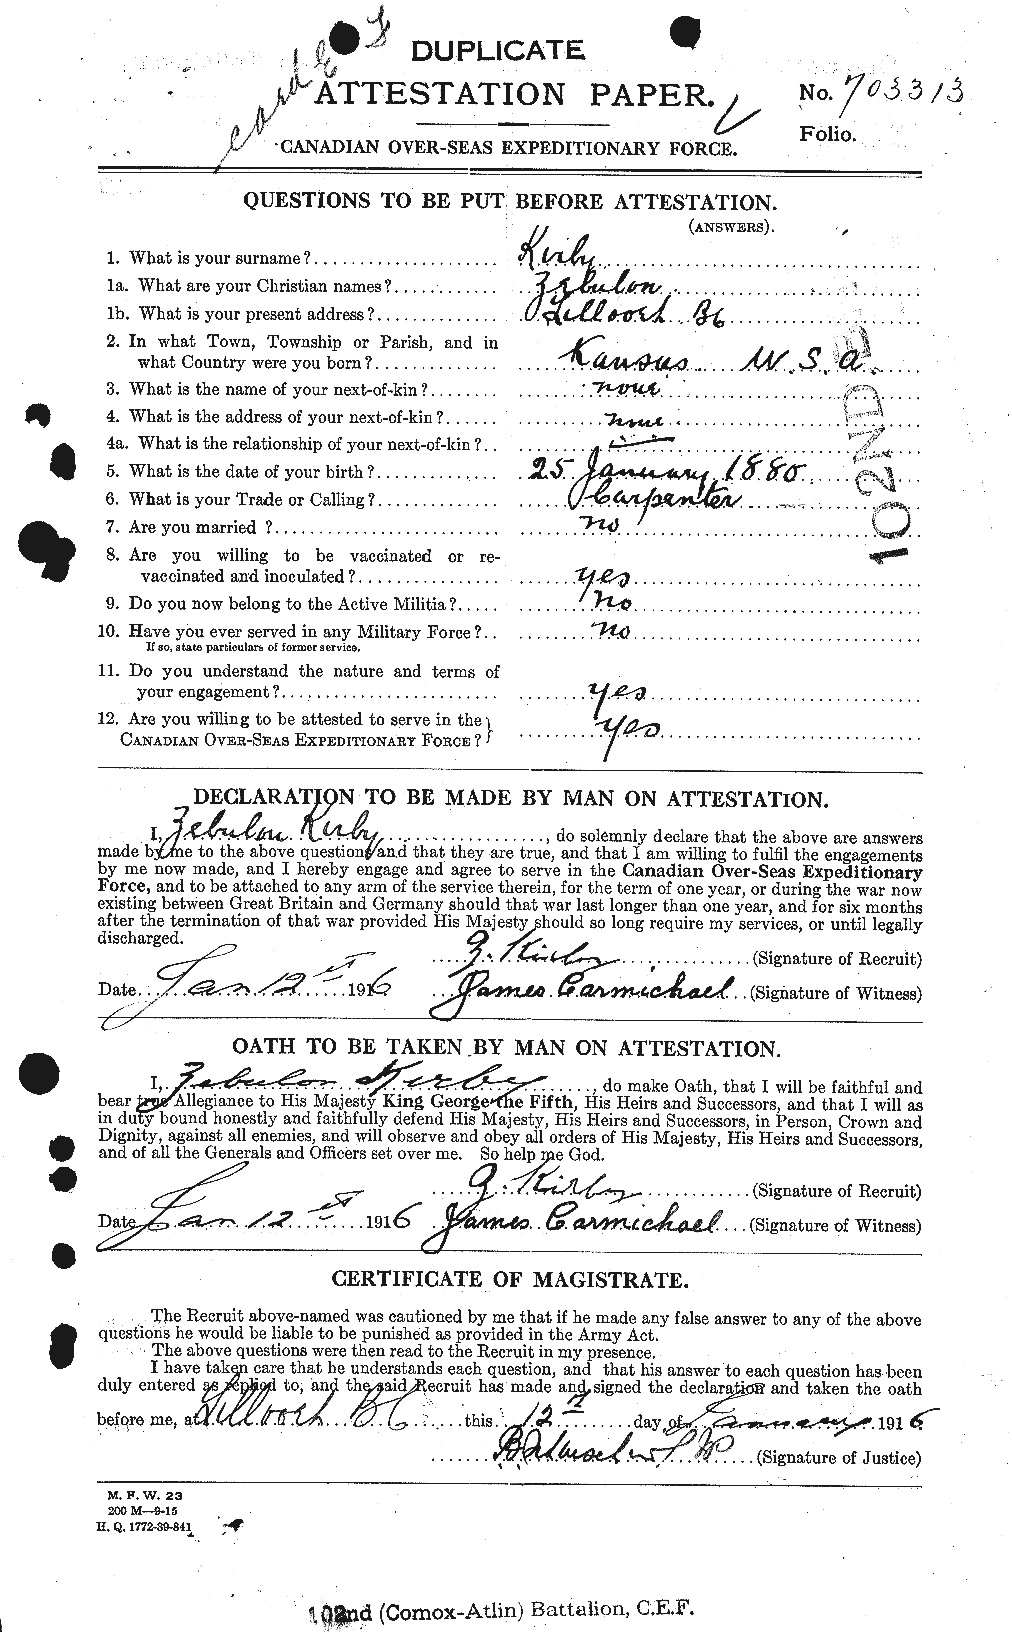 Personnel Records of the First World War - CEF 437305a